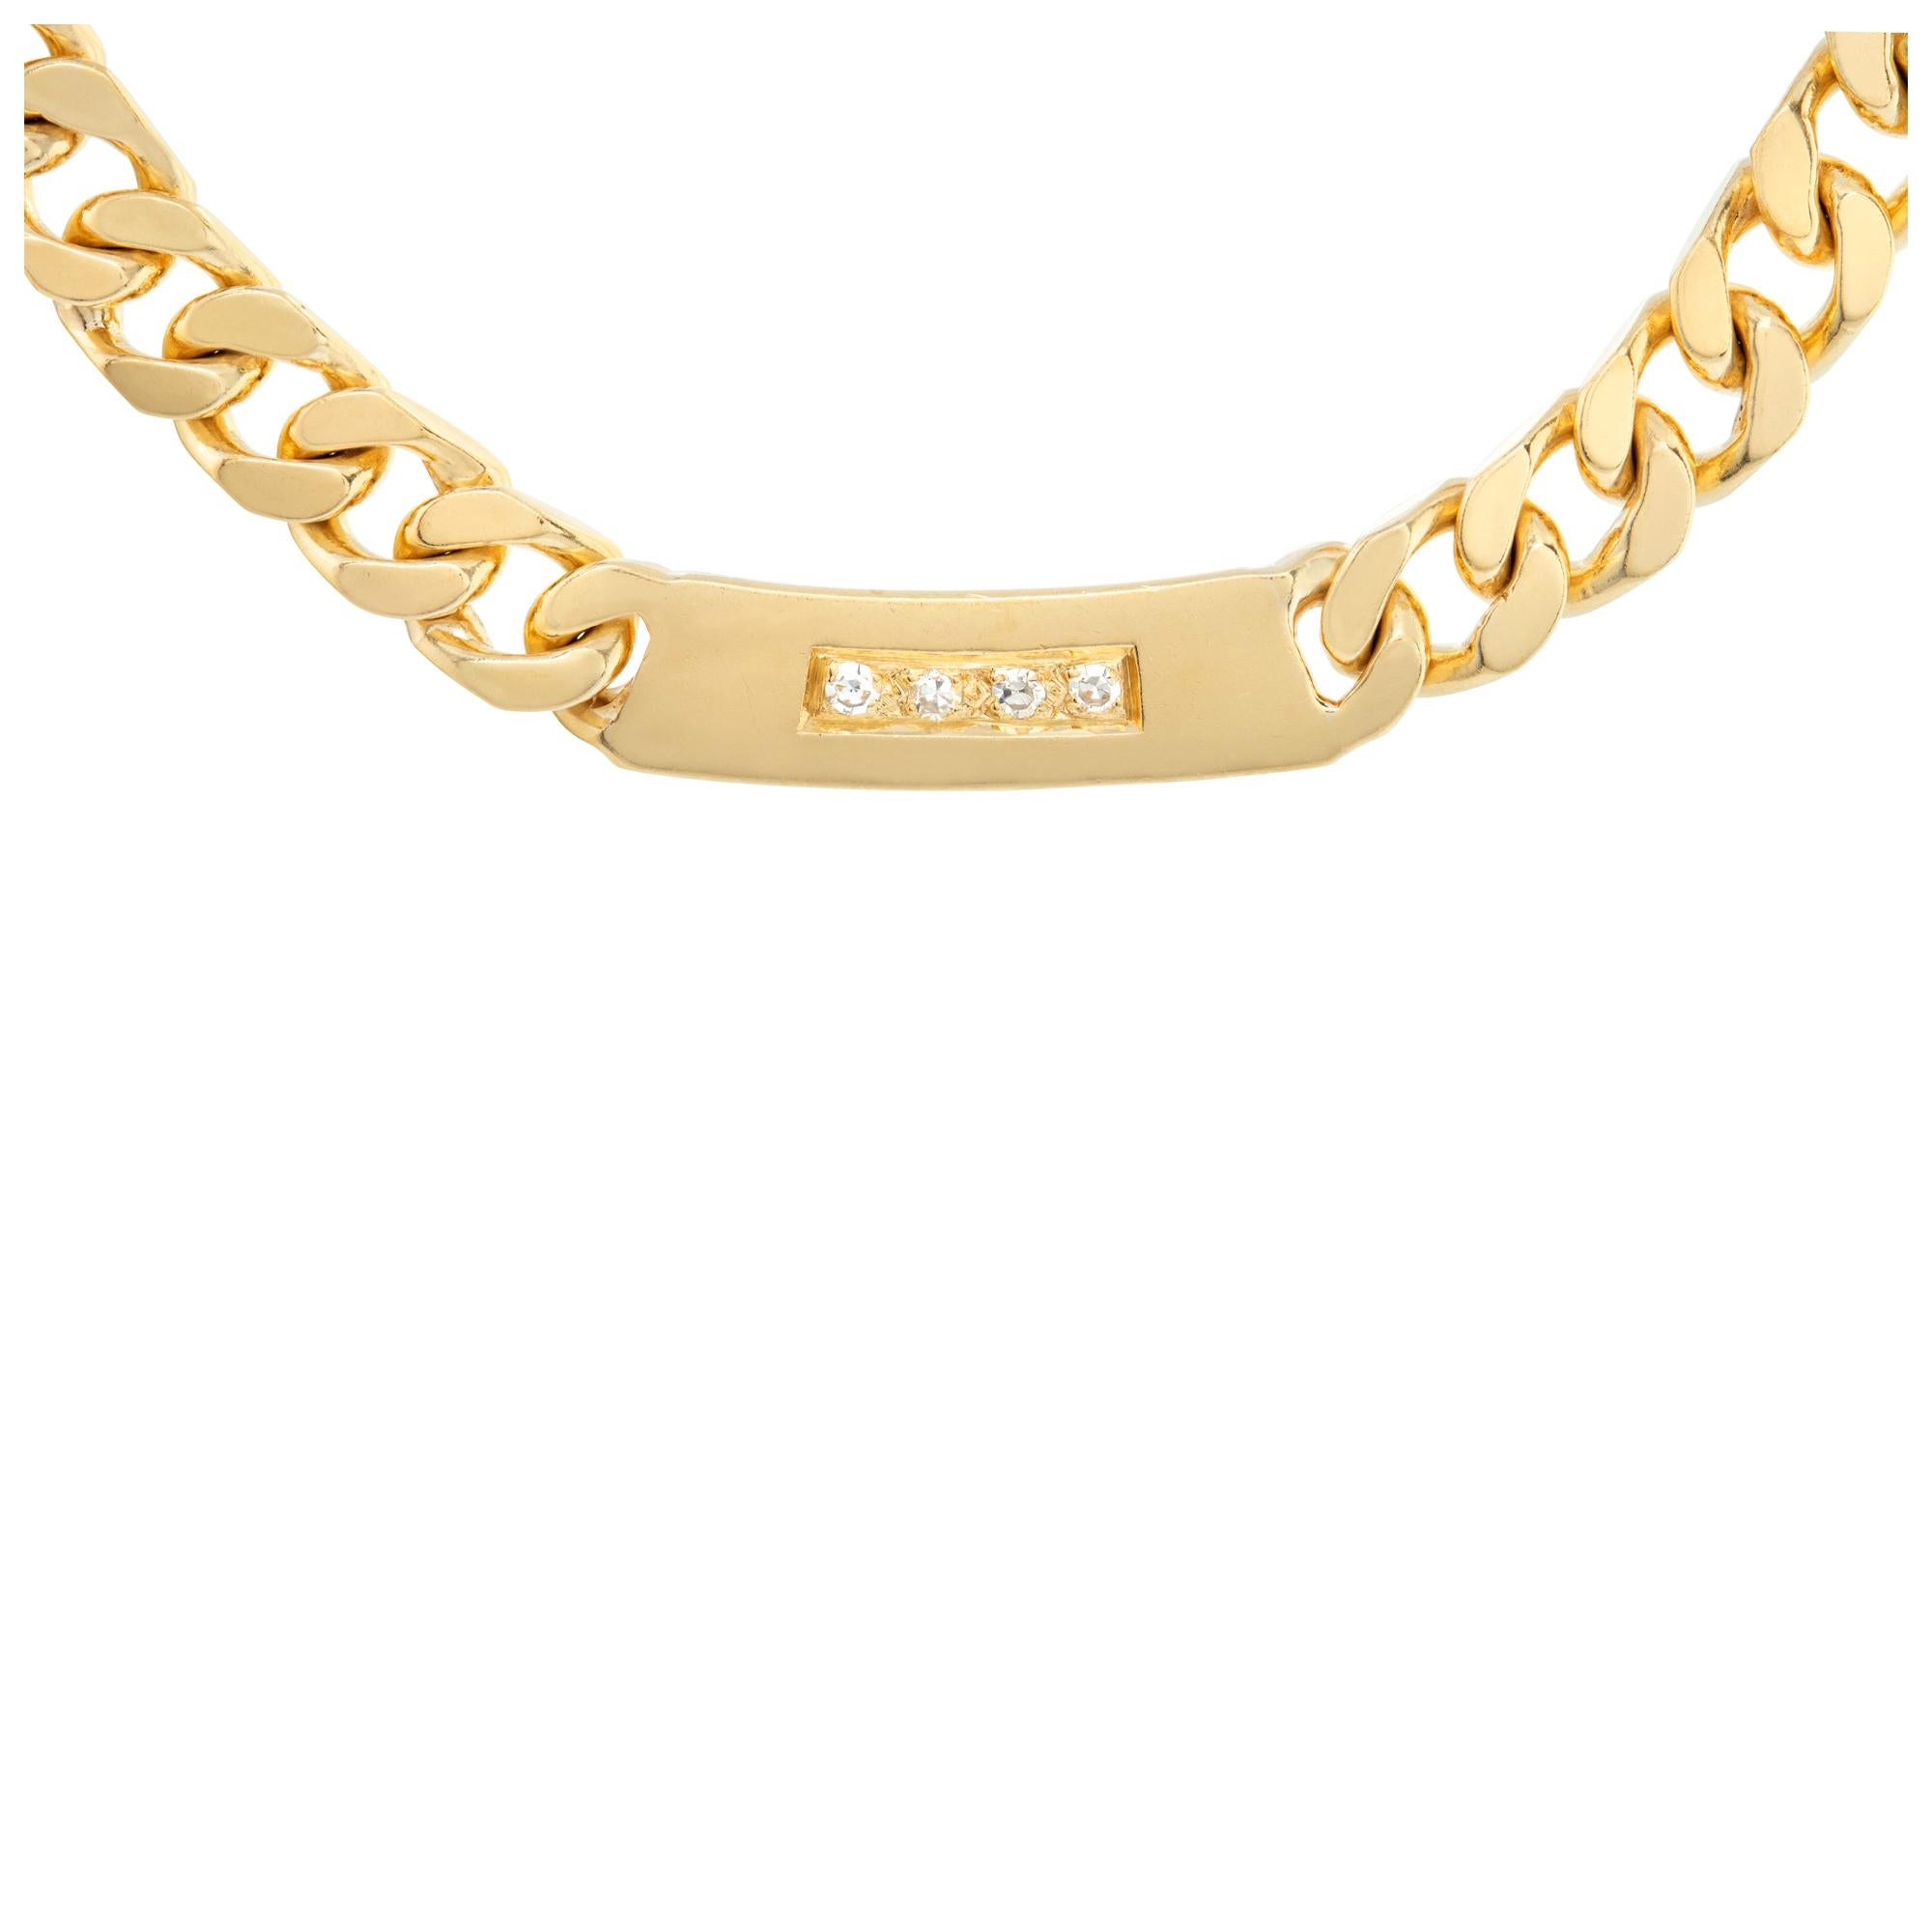 Flat cuban Link choker in 18k gold with flat bar stations and diamond accents. 16